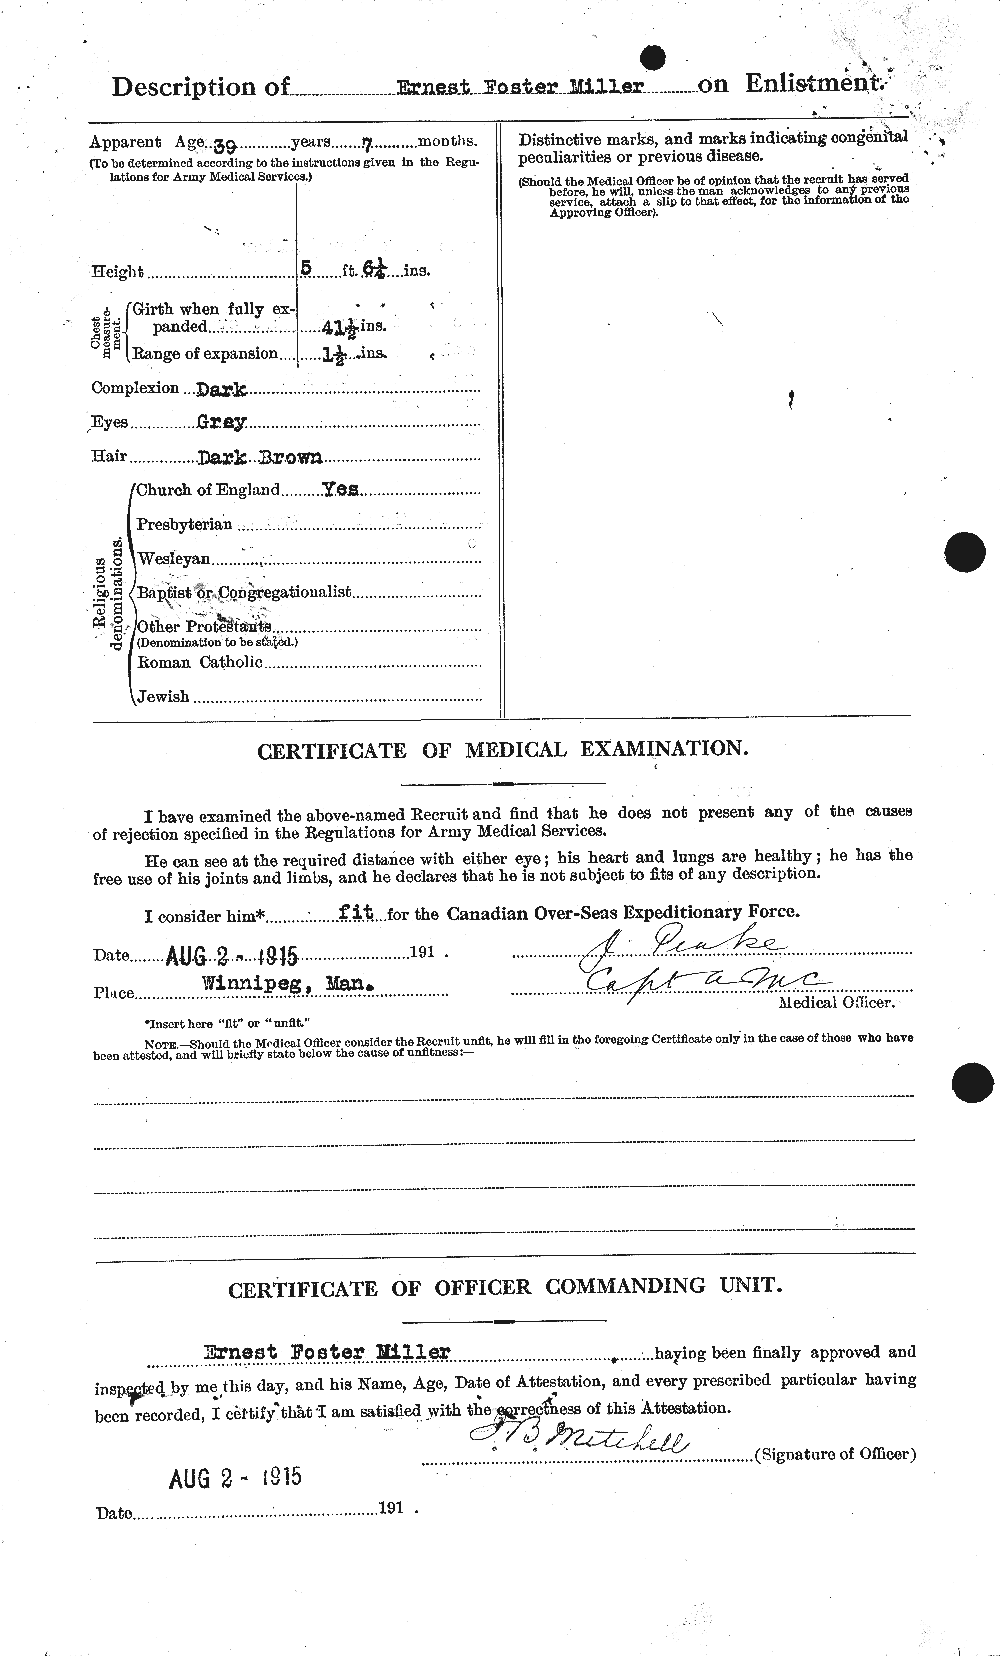 Personnel Records of the First World War - CEF 500504b